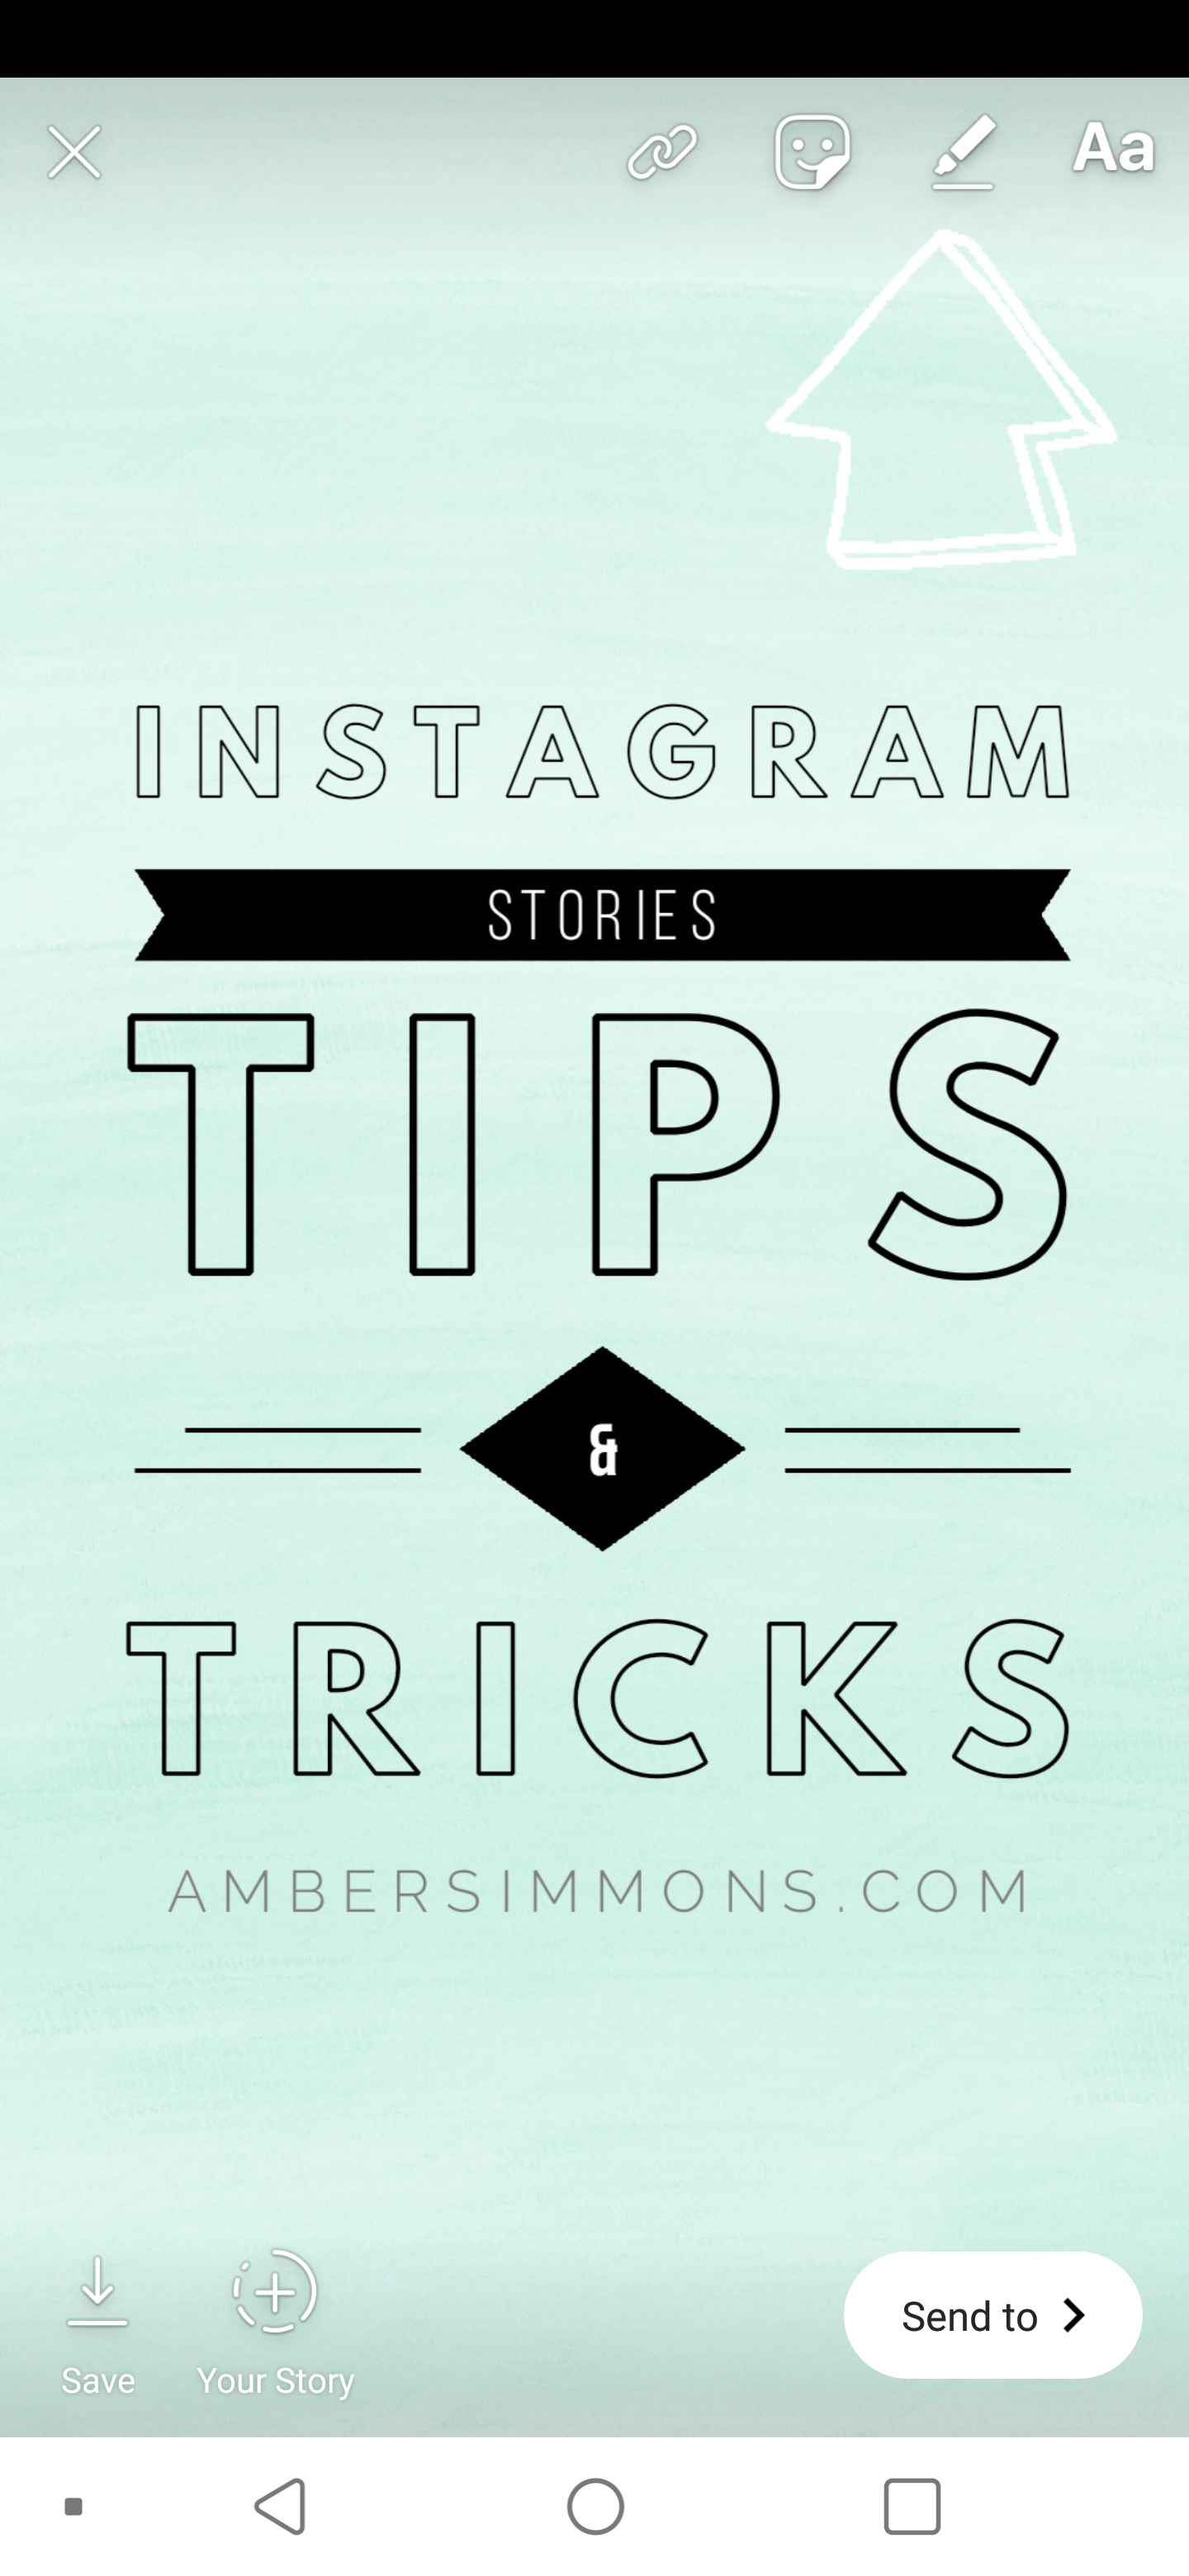 Instagram stories are a fun way to connect with your community. These Instagram stories tips and tricks will have you posting like a pro in no time.